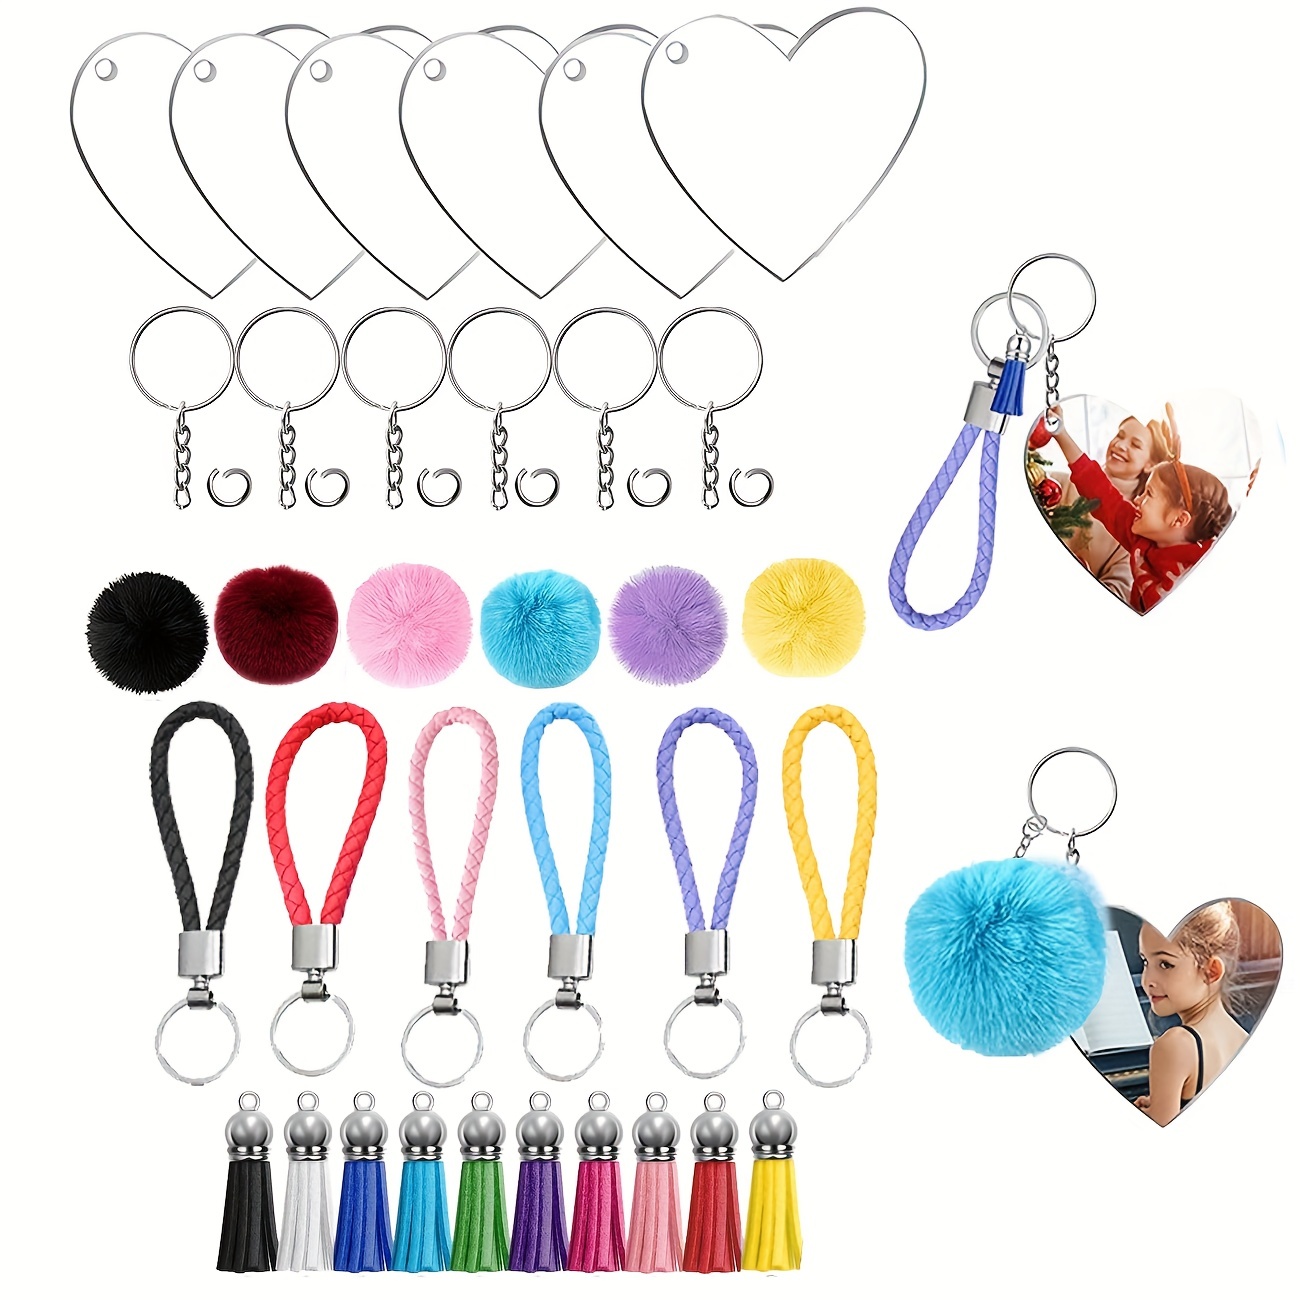 Acrylic Keychain Blanks, Audab 108pcs Clear Keychains for Vinyl Kit Including 36pcs Acrylic Blanks, 36pcs Keychain Rings and 36pcs Jump Rings for